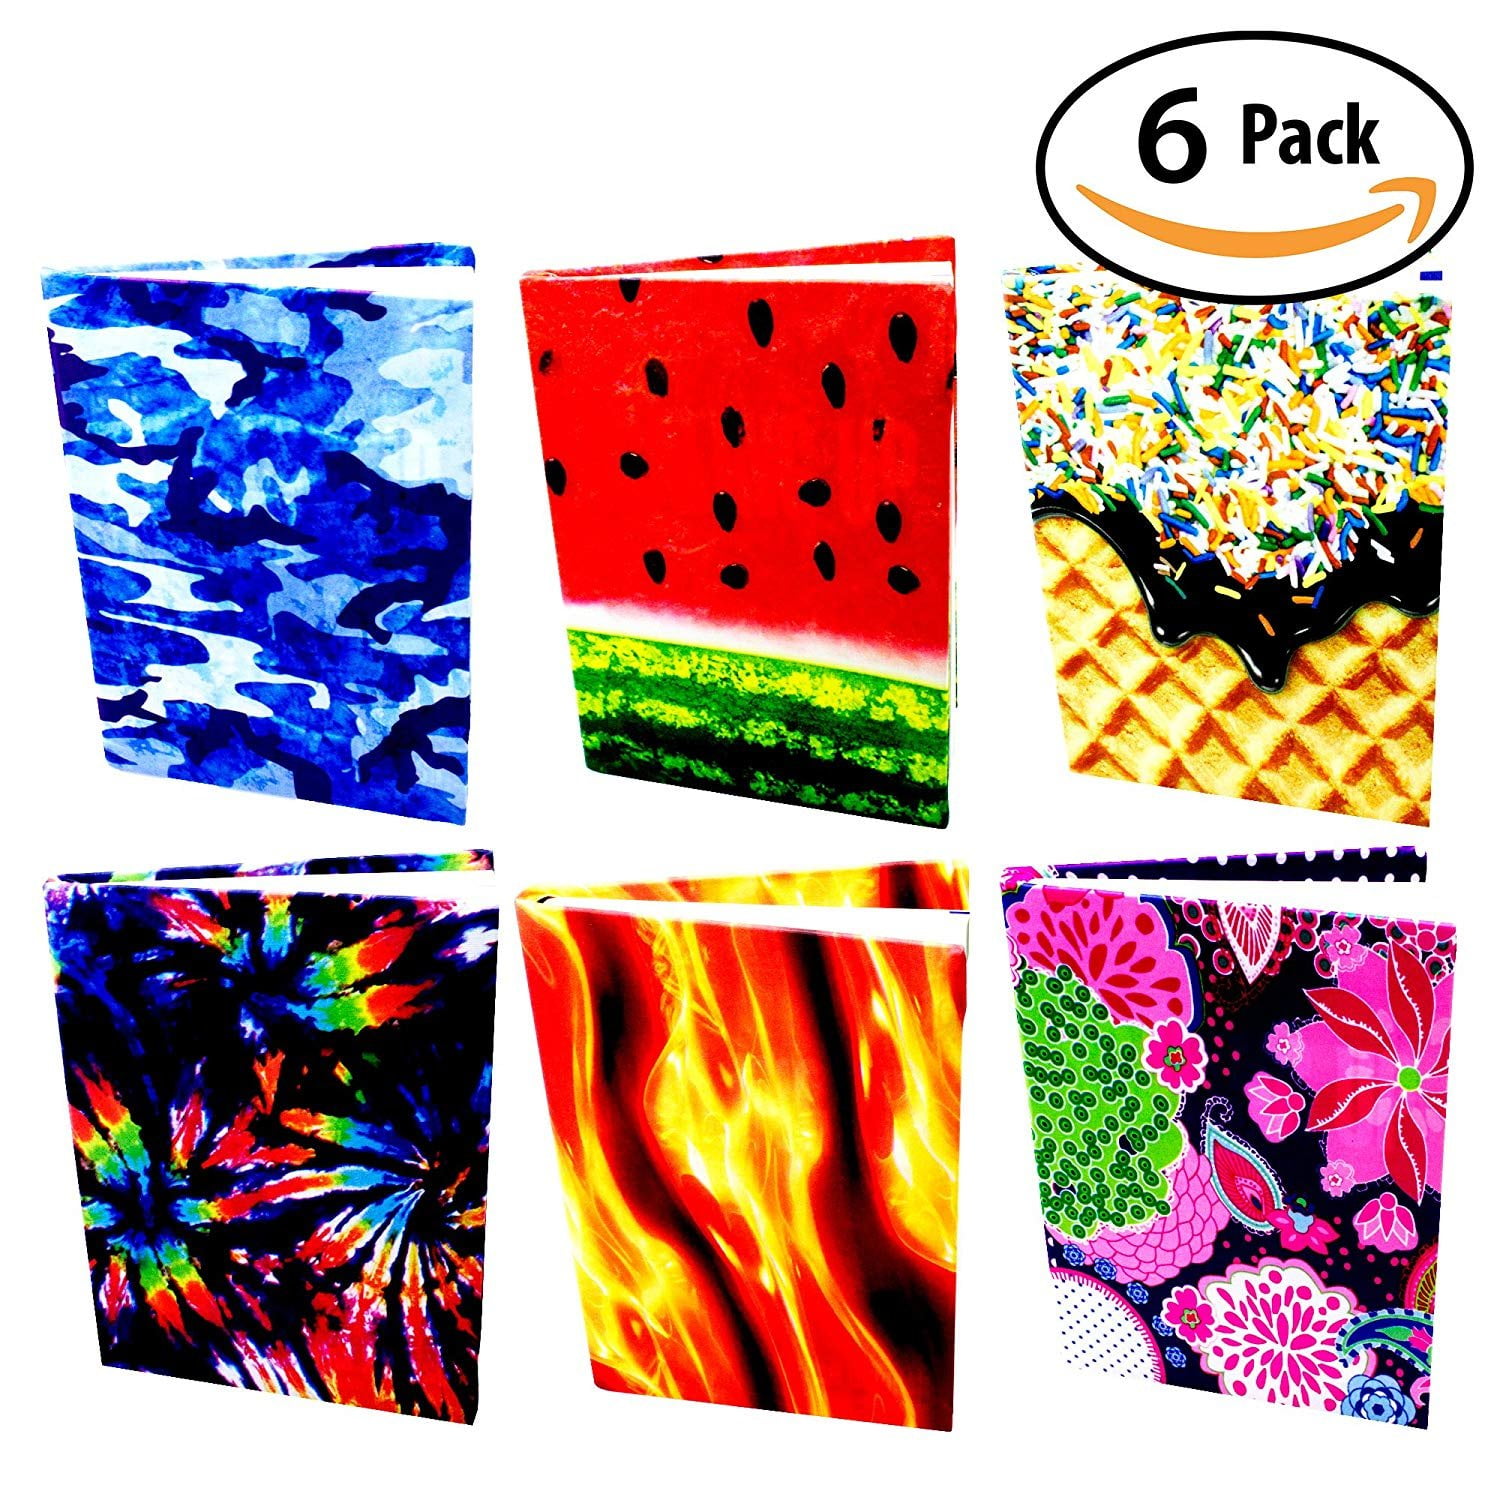 Nylon Fabric School Book Protector Easy to Put On Jacket wash Re-use Ultra Print Book Sox Stretchable Book Cover: Jumbo 6 Print Value Pack Fits Most Hardcover Textbooks up to 9 x 11 Adhesive-Free 